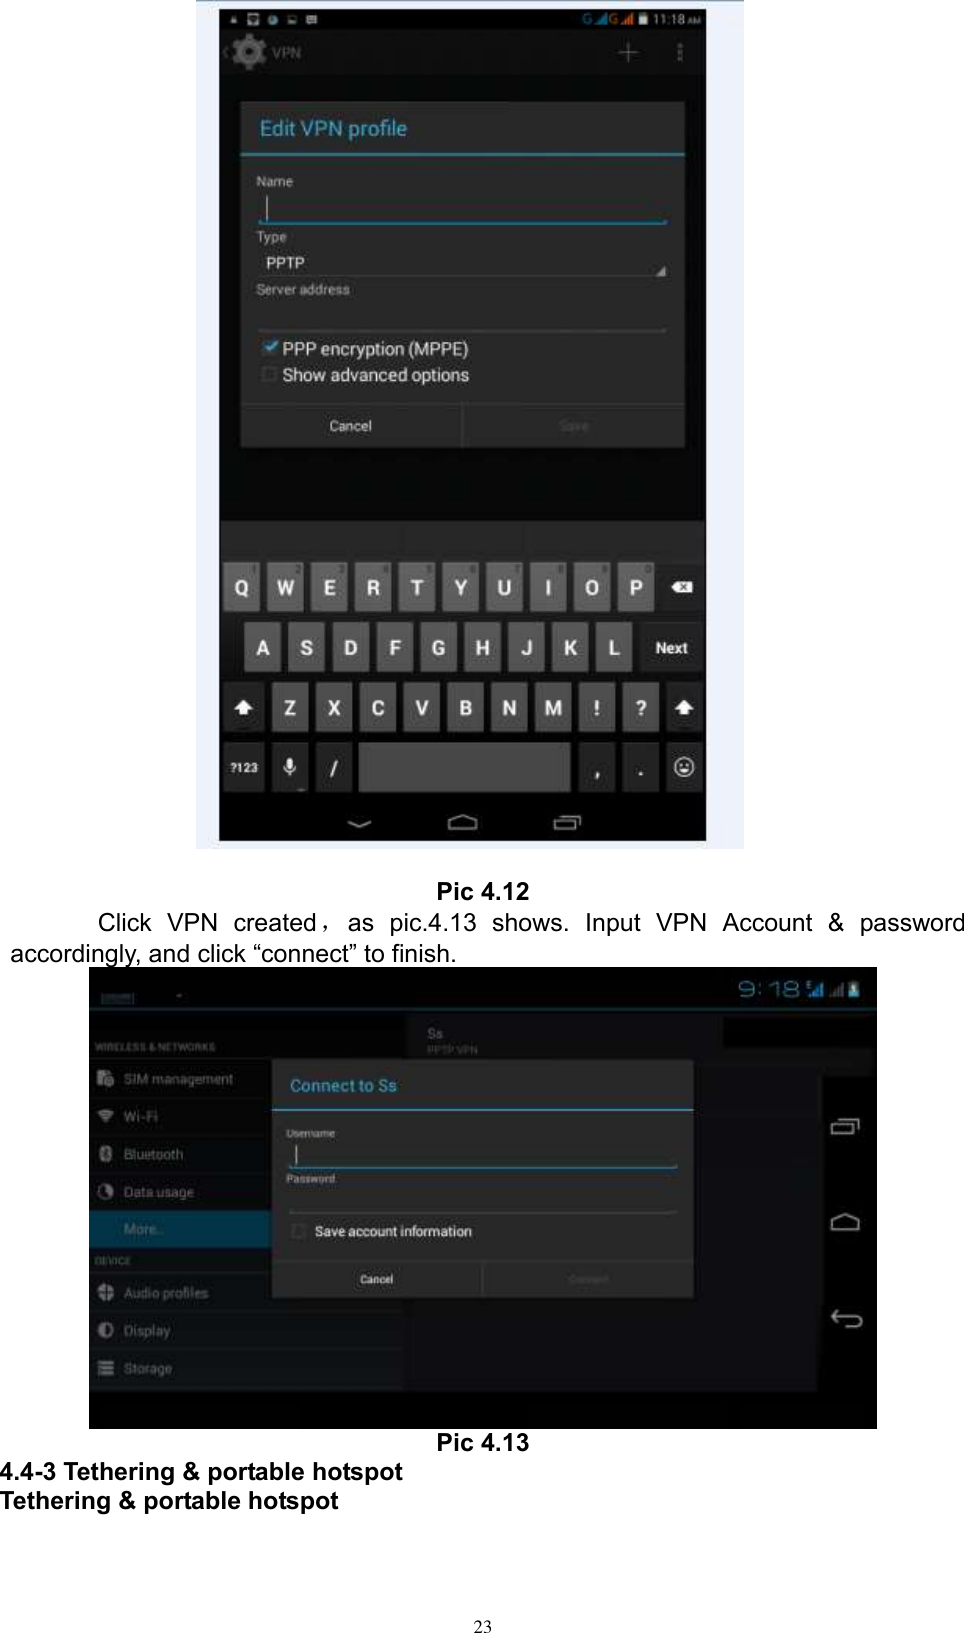      23   Pic 4.12     Click  VPN  created，as  pic.4.13  shows.  Input  VPN  Account  &amp;  password accordingly, and click “connect” to finish.    Pic 4.13 4.4-3 Tethering &amp; portable hotspot Tethering &amp; portable hotspot 